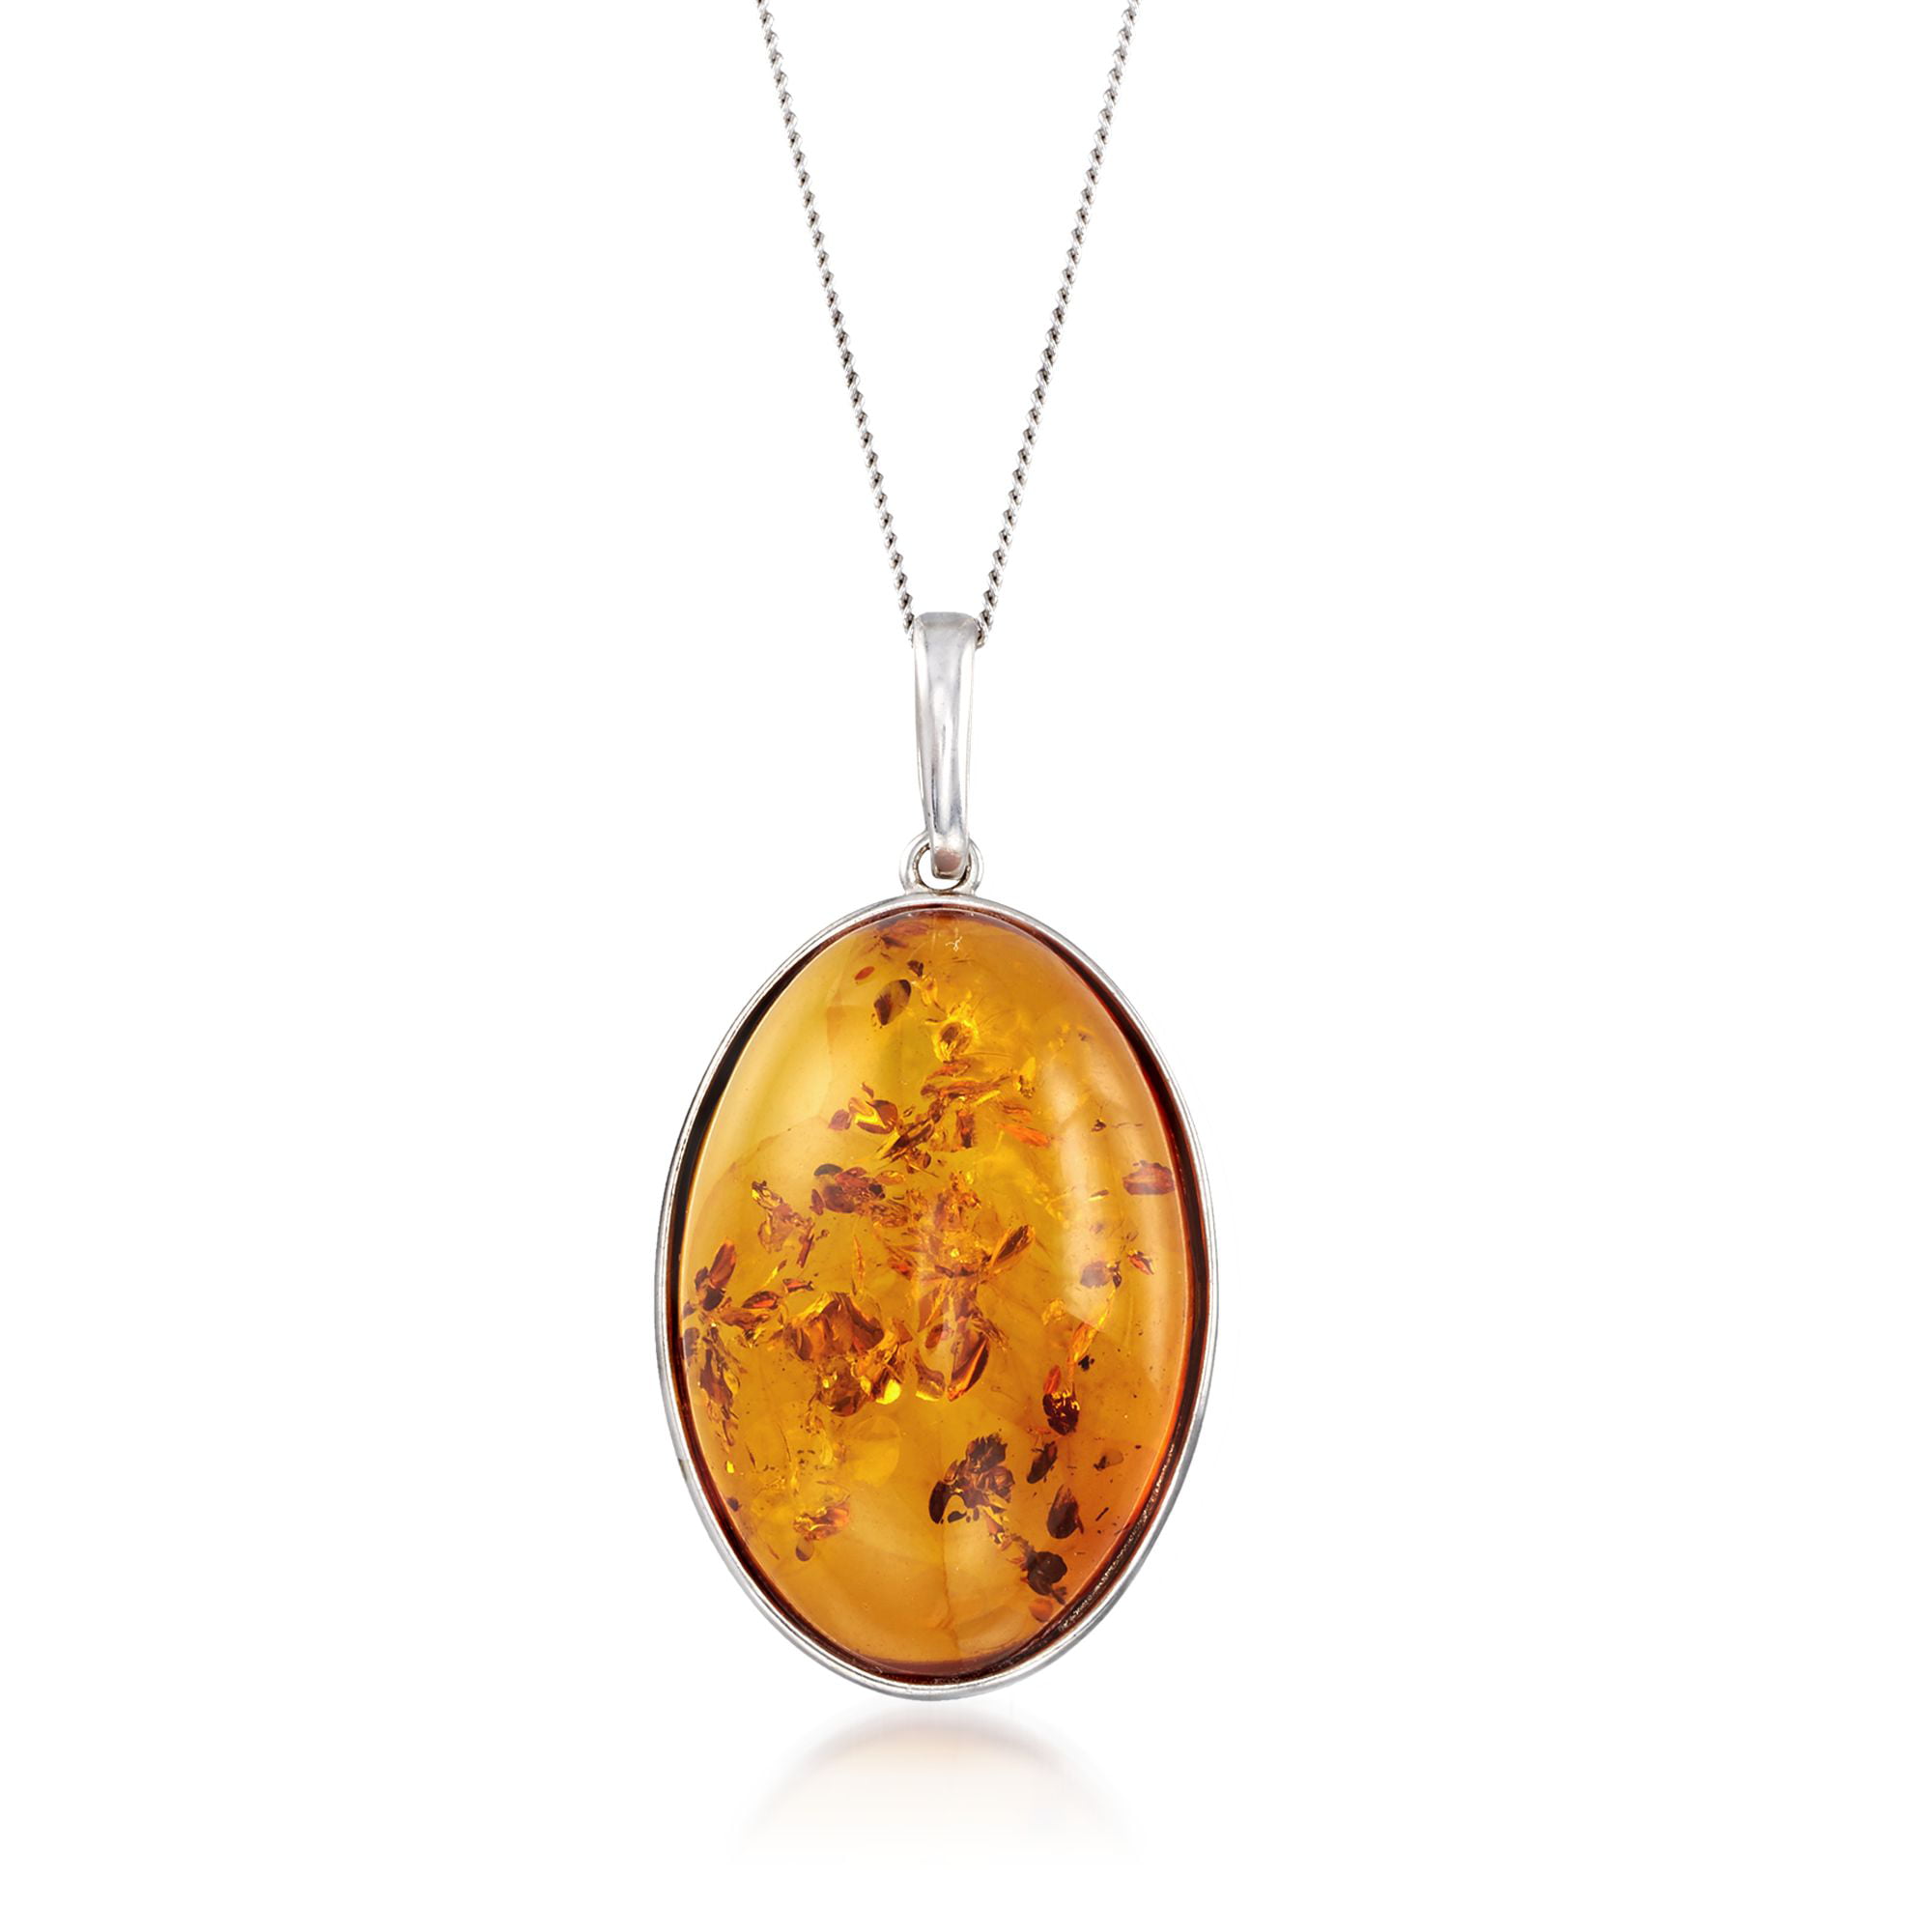 Details about   Young Sea Star Baltic Amber Pendant with Silver 925 